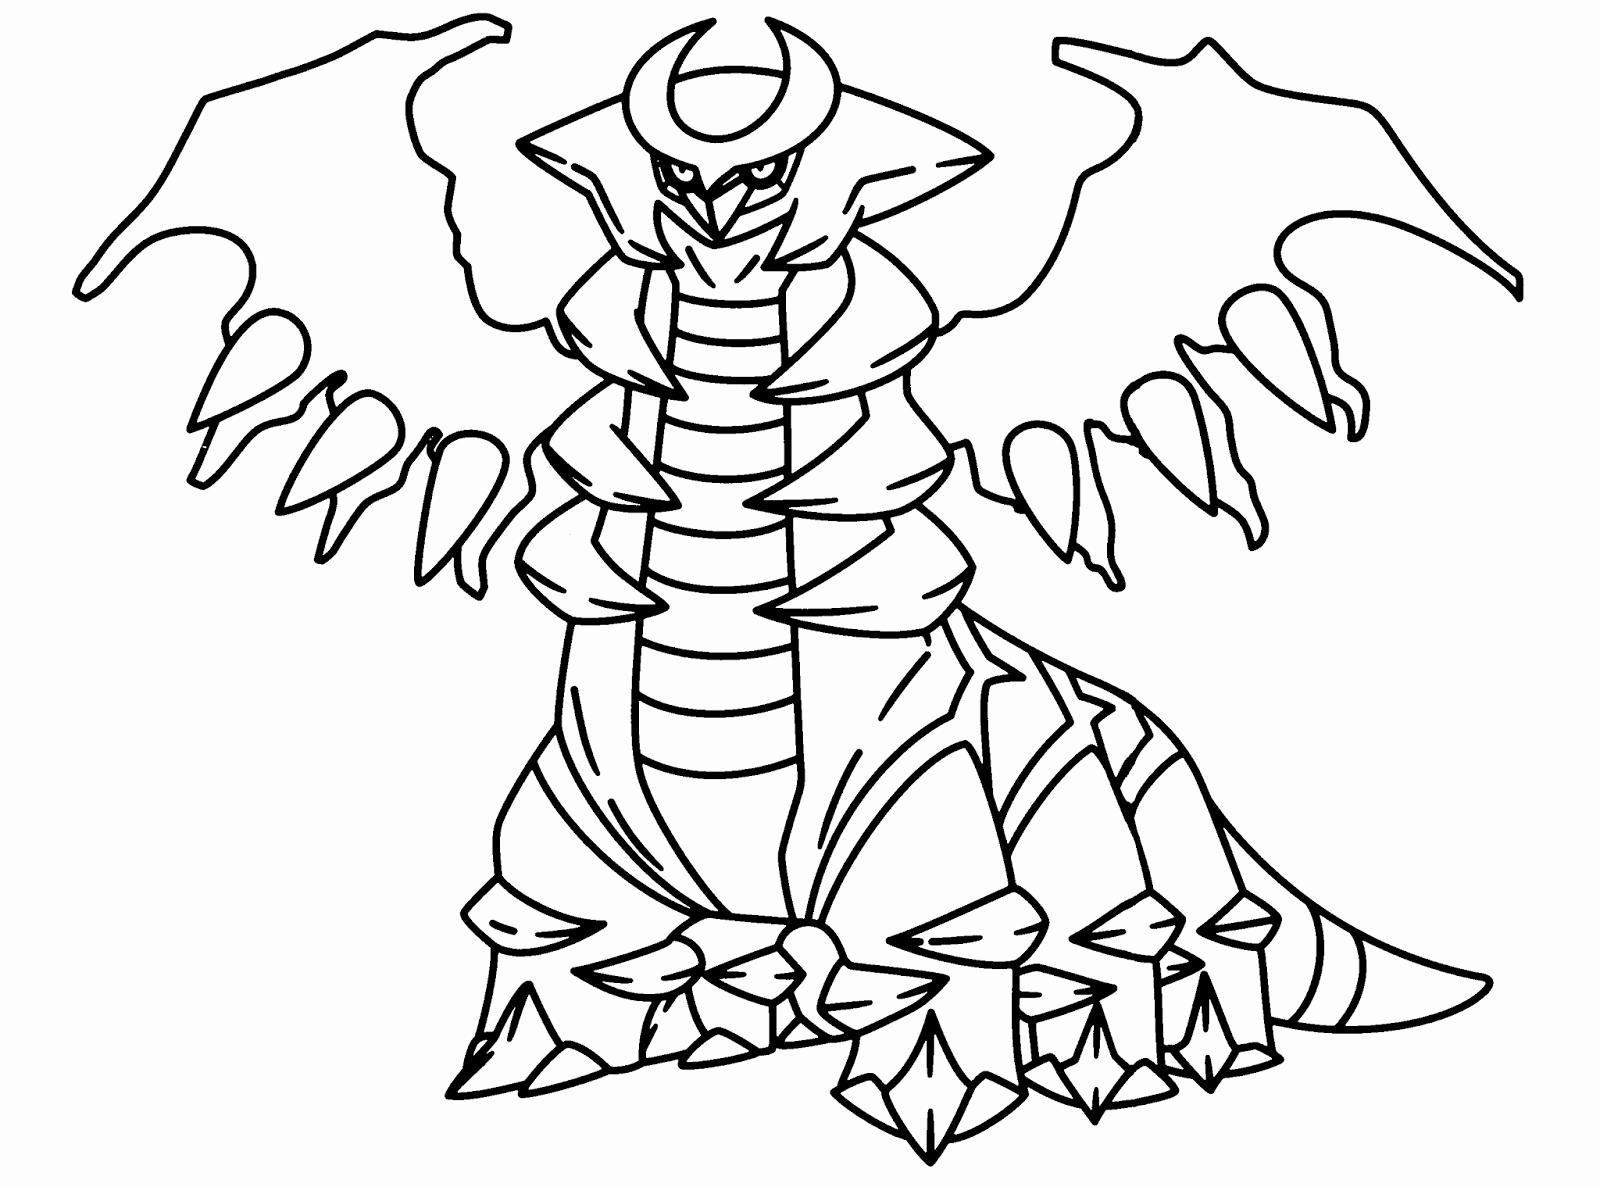 Free Printable Pokemon Pictures Elegant Free Legendary Pokemon Coloring Pages for Kids